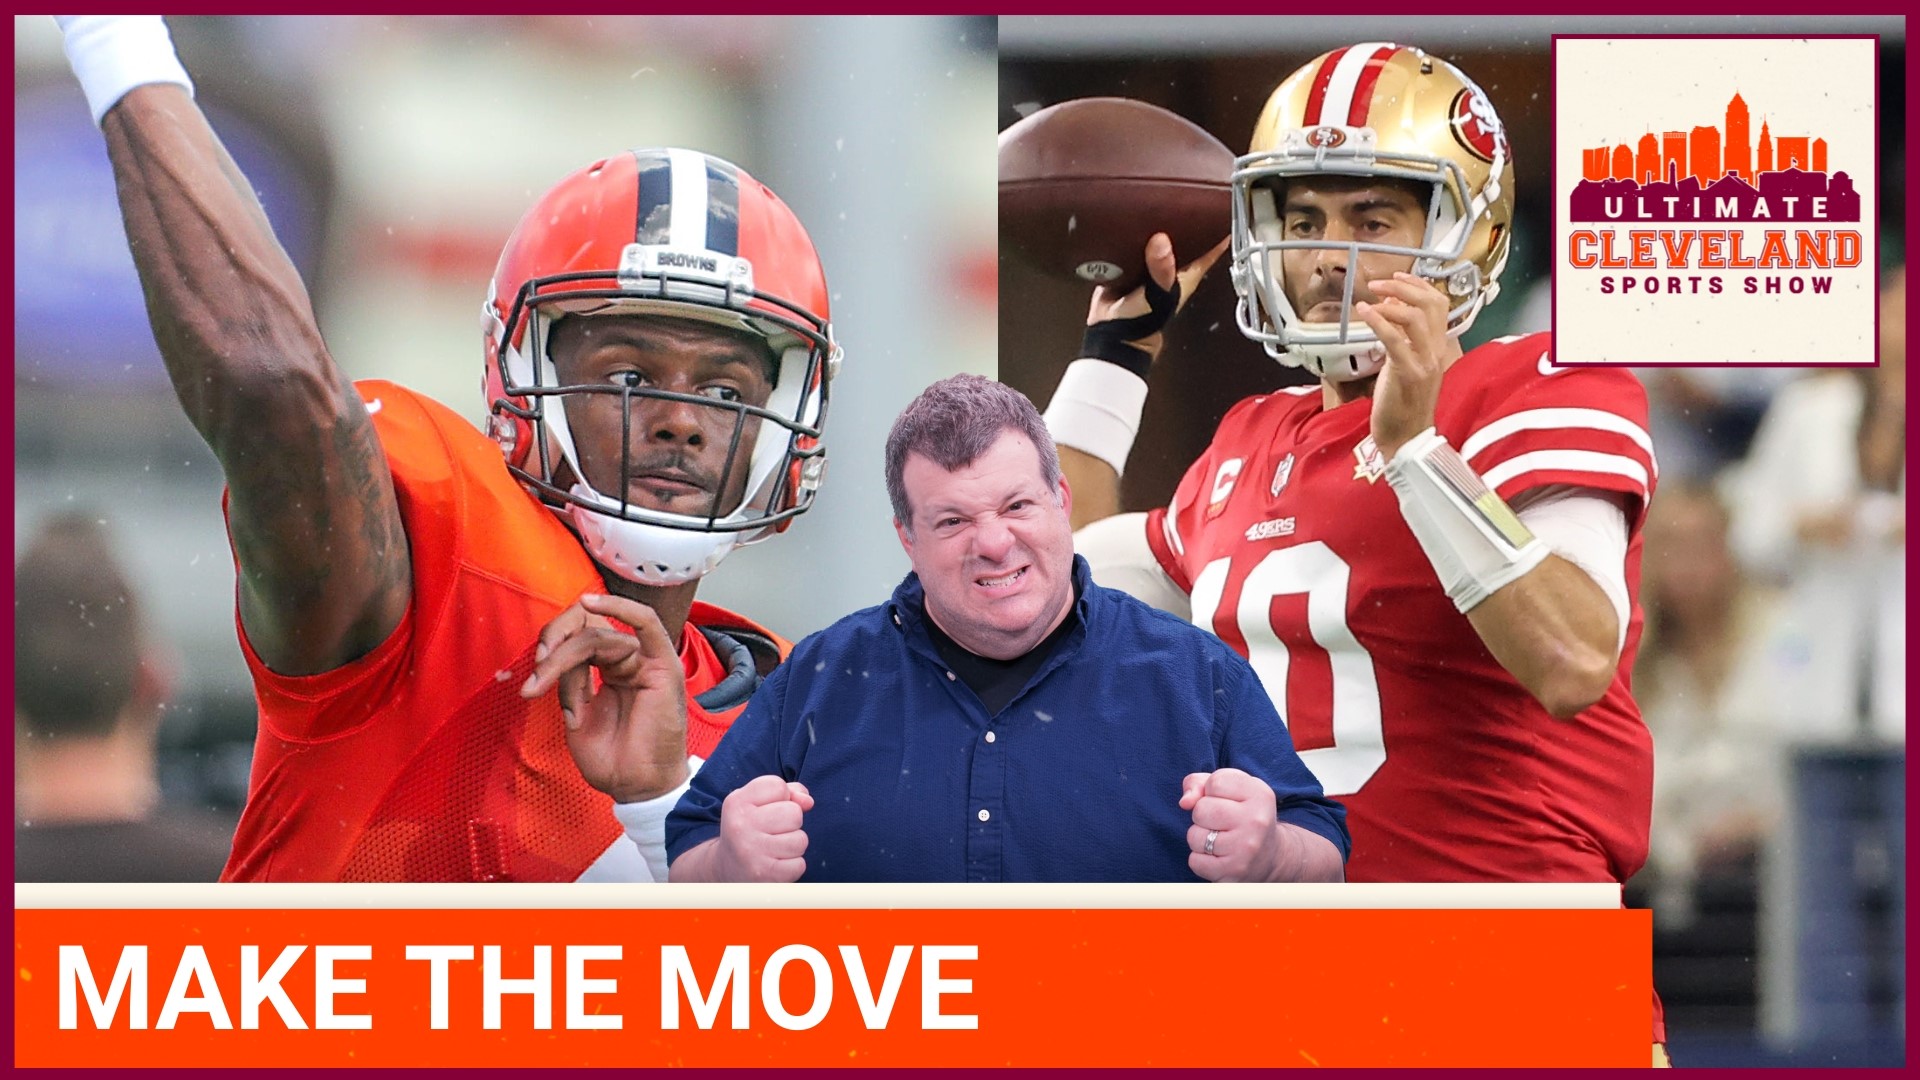 Is Jimmy Garoppolo the answer at QB for the Cleveland Browns if Deshaun Watson gets suspended for more than 6 games, or can Brissett keep the team afloat?